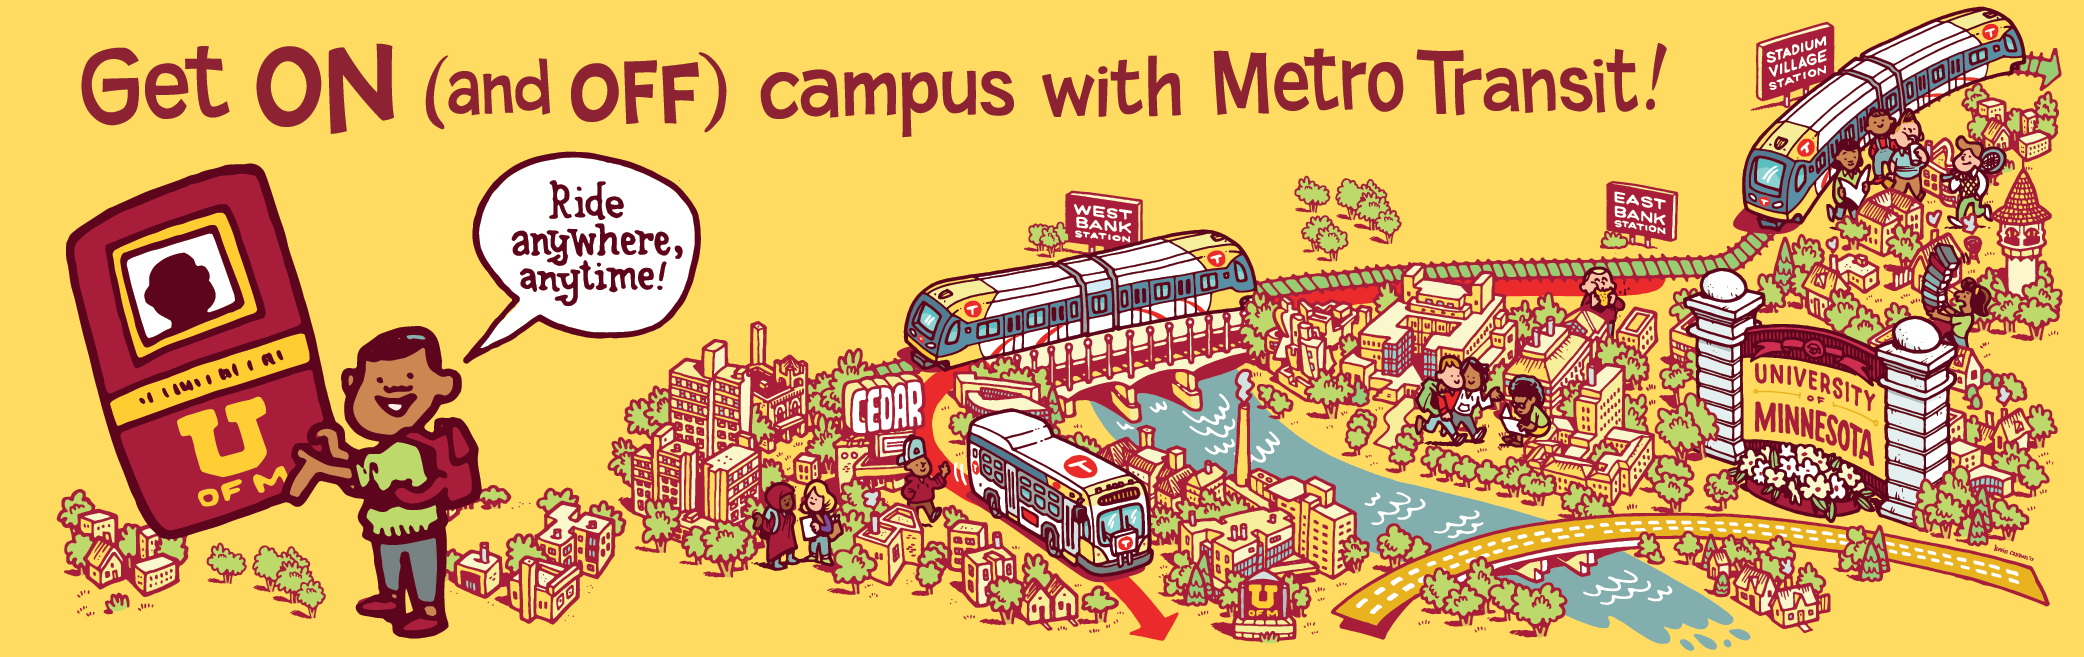 Illustration of college students at the U of M, taking transit.